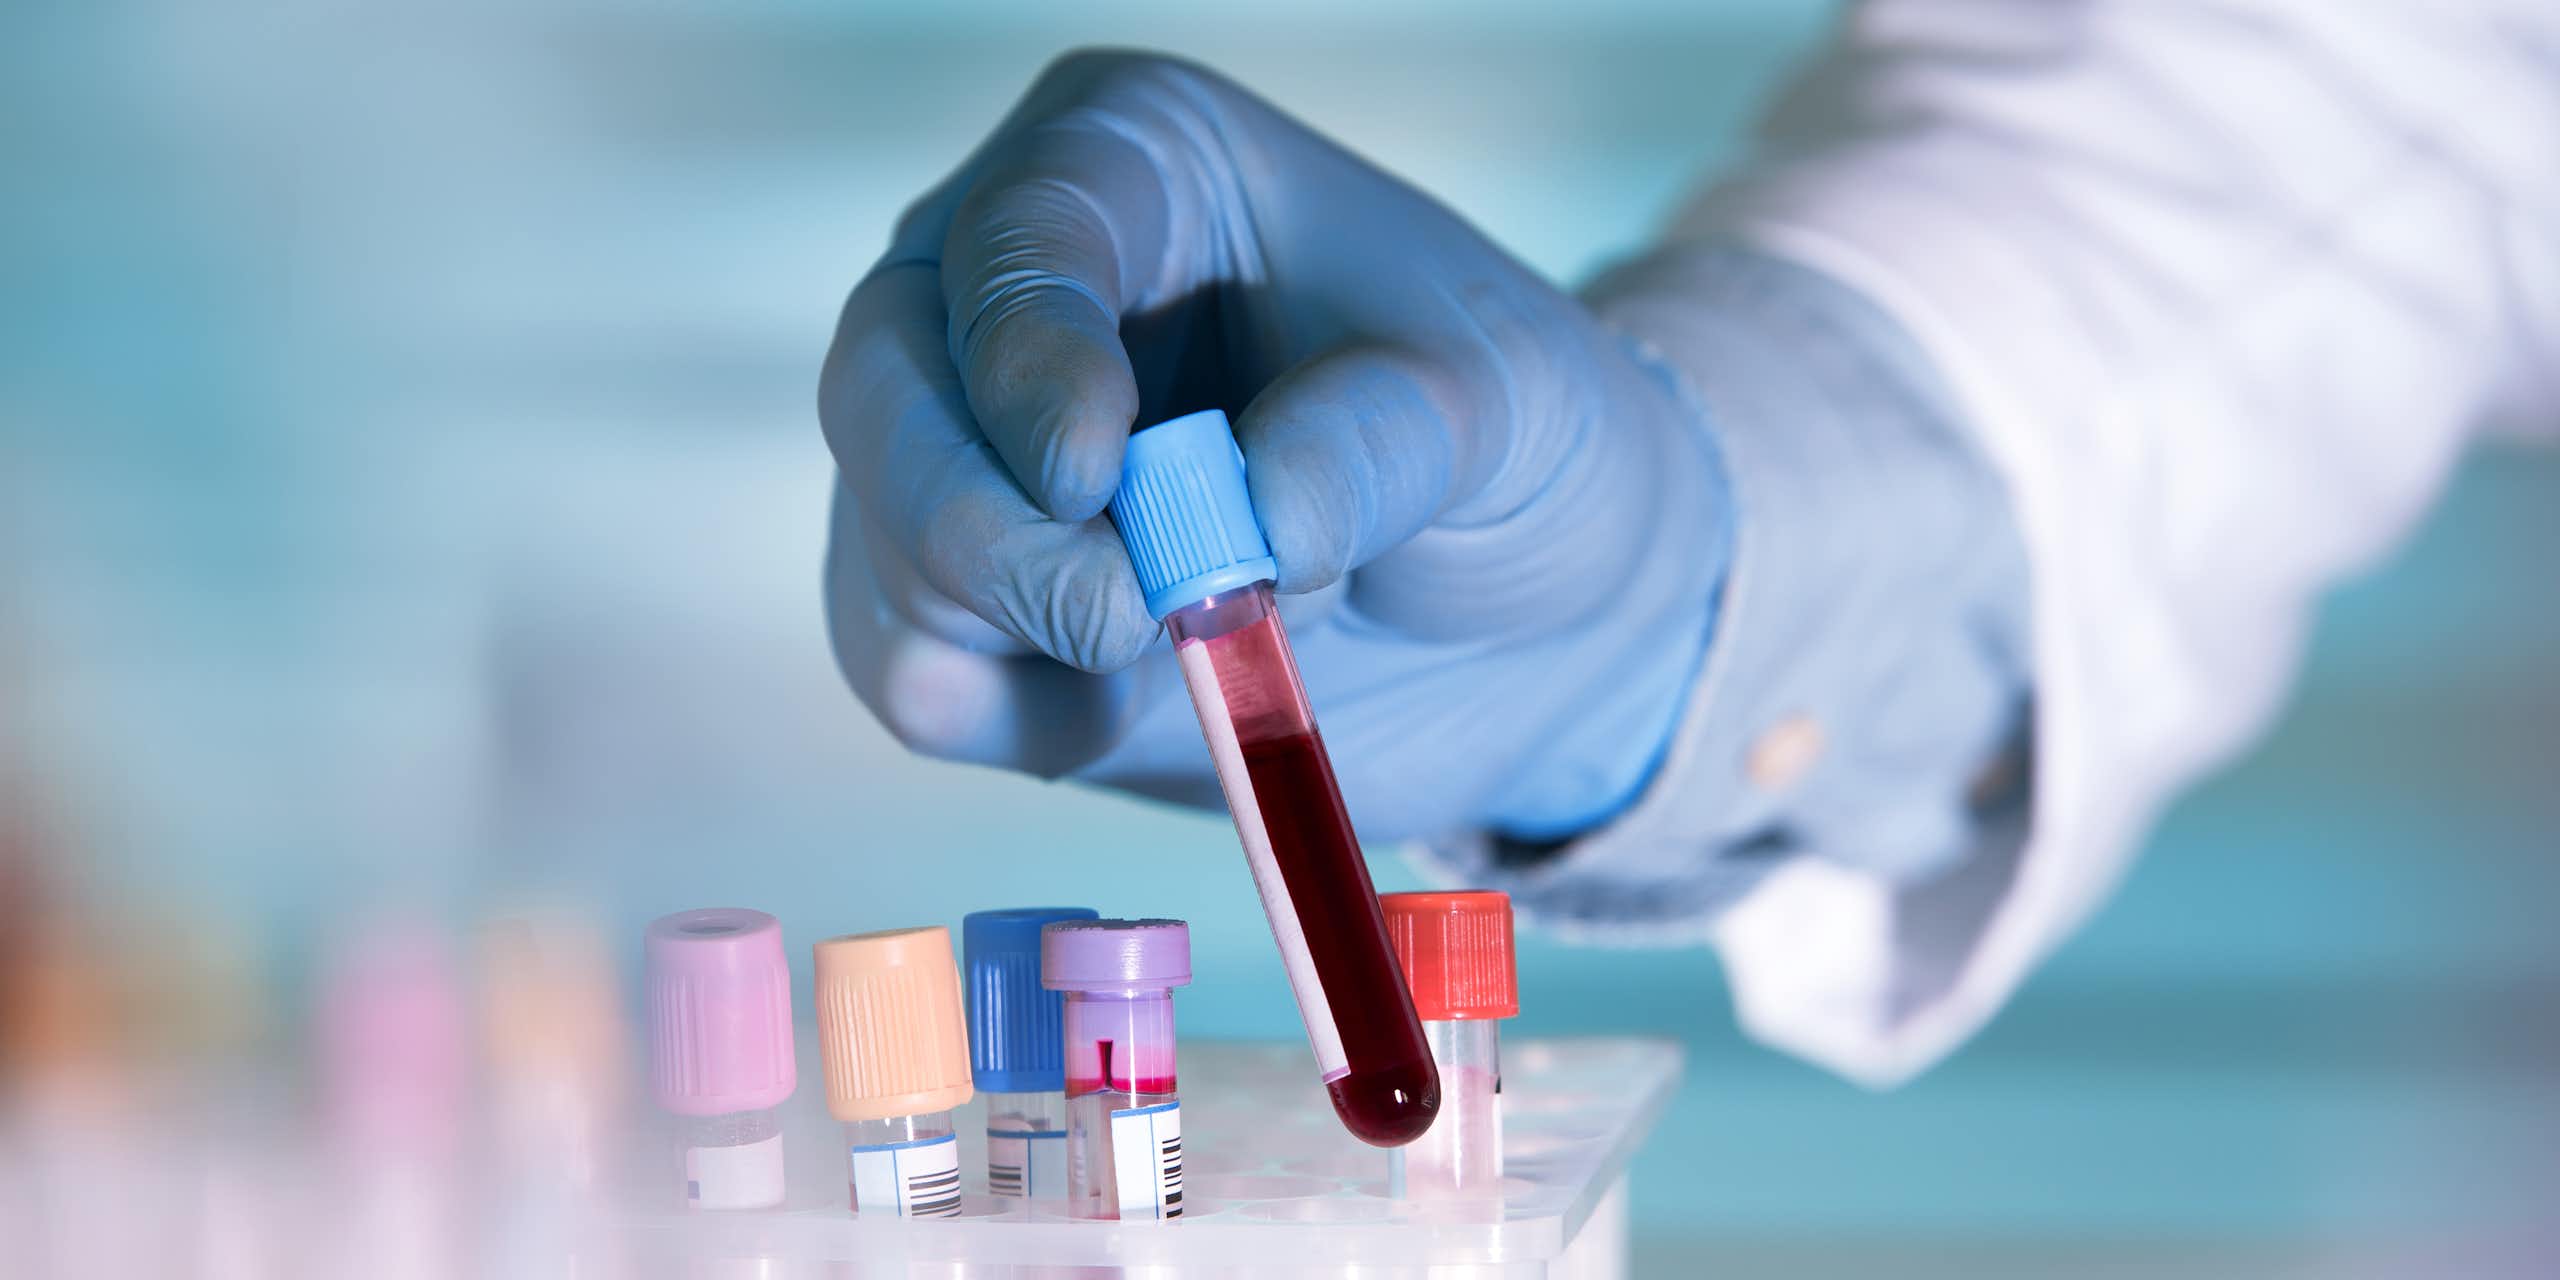 A lab technician wearing a blue surgical glove holds a vial of blood.